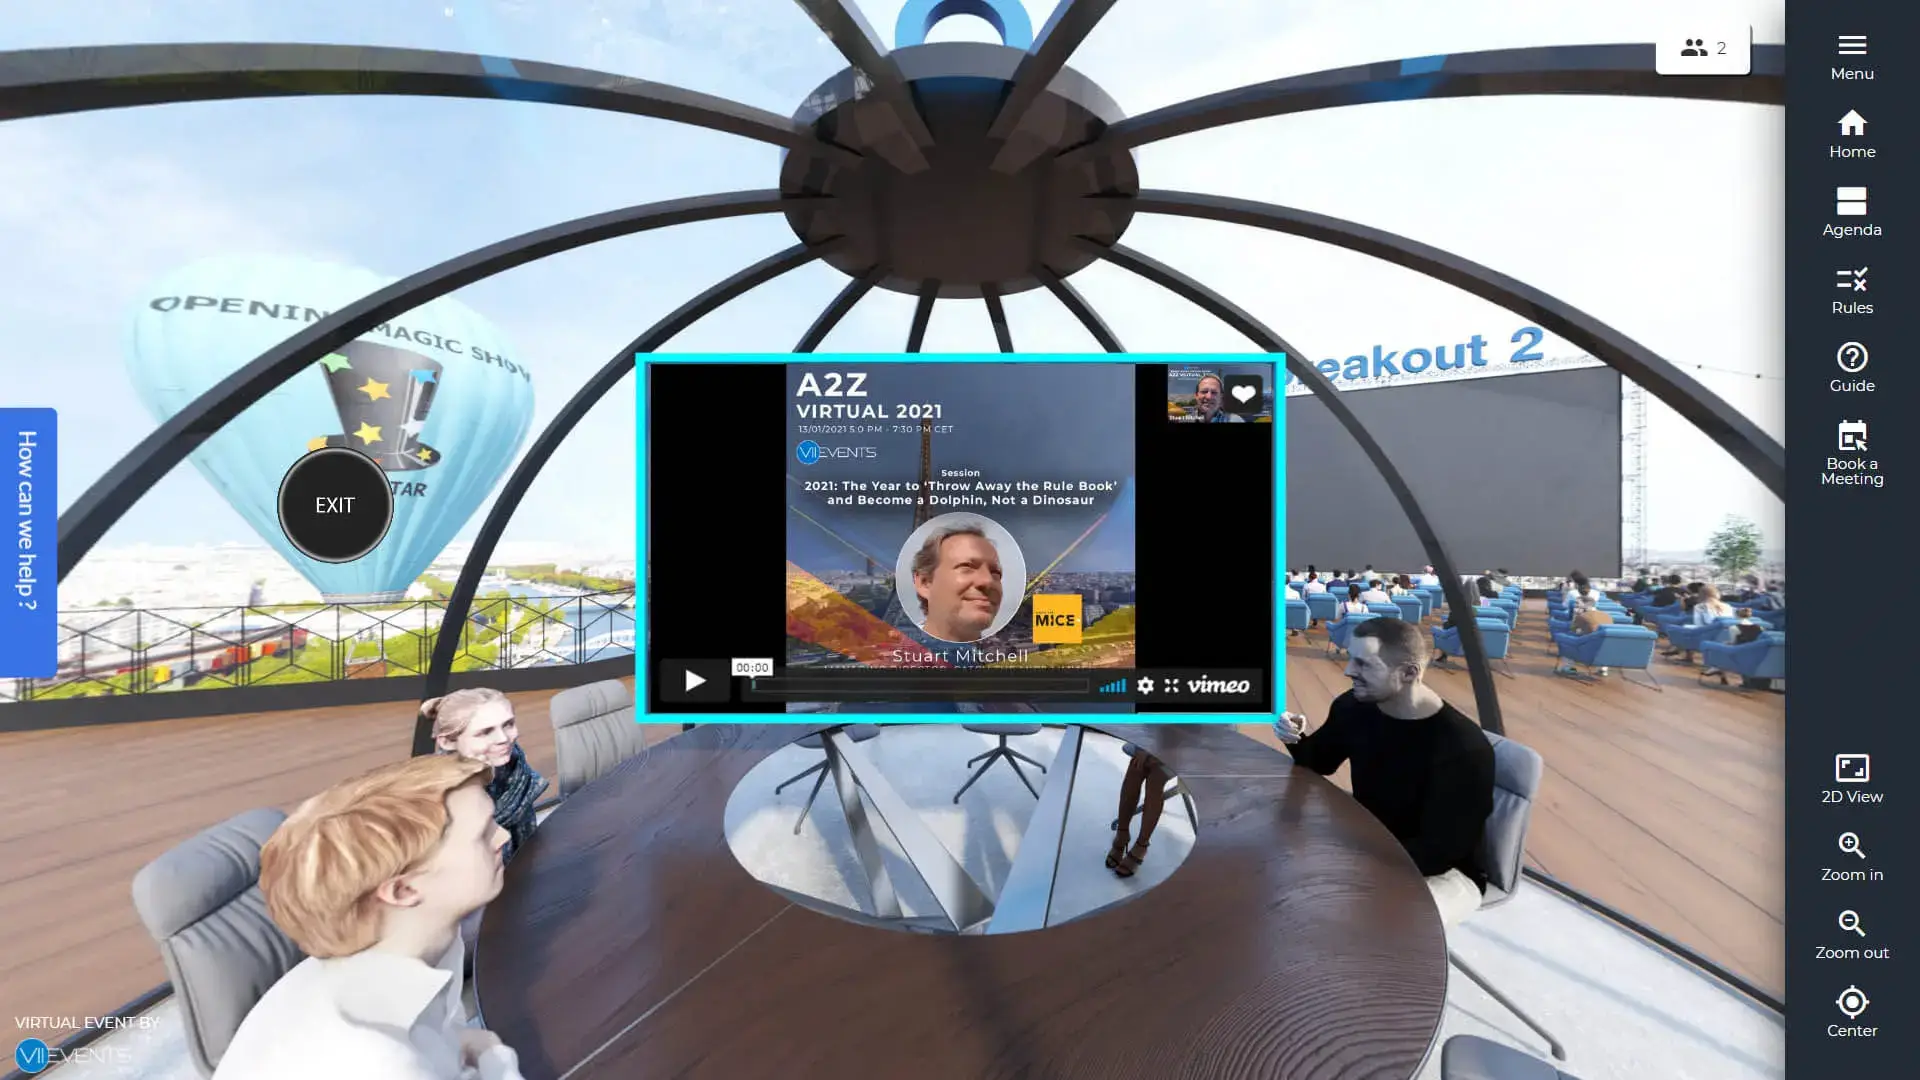 a2z-virtual-event-booth